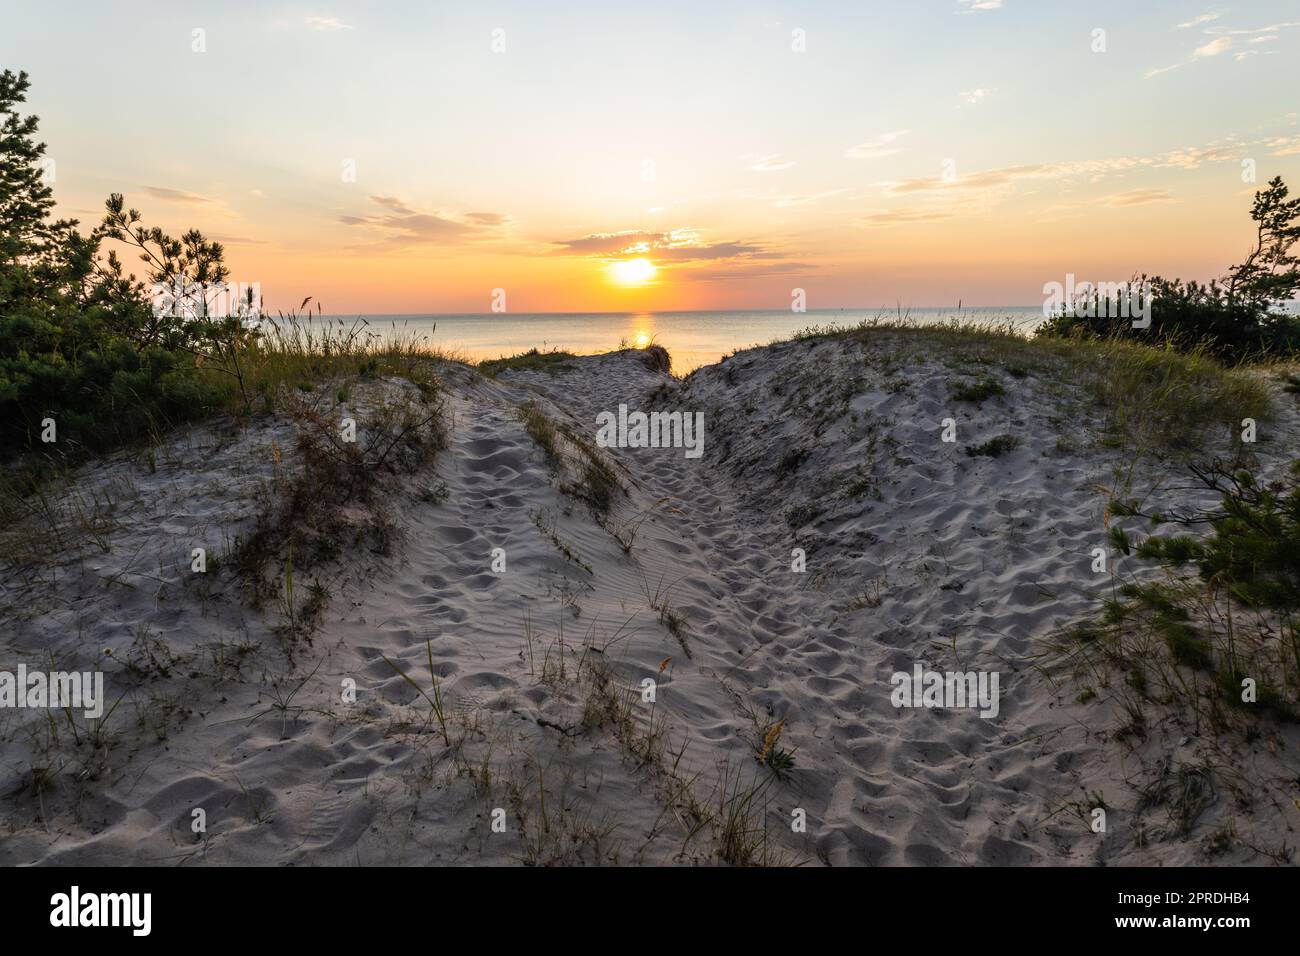 Sunset at the Baltic sea shore. Typical Baltic sea beach landscape Stock Photo